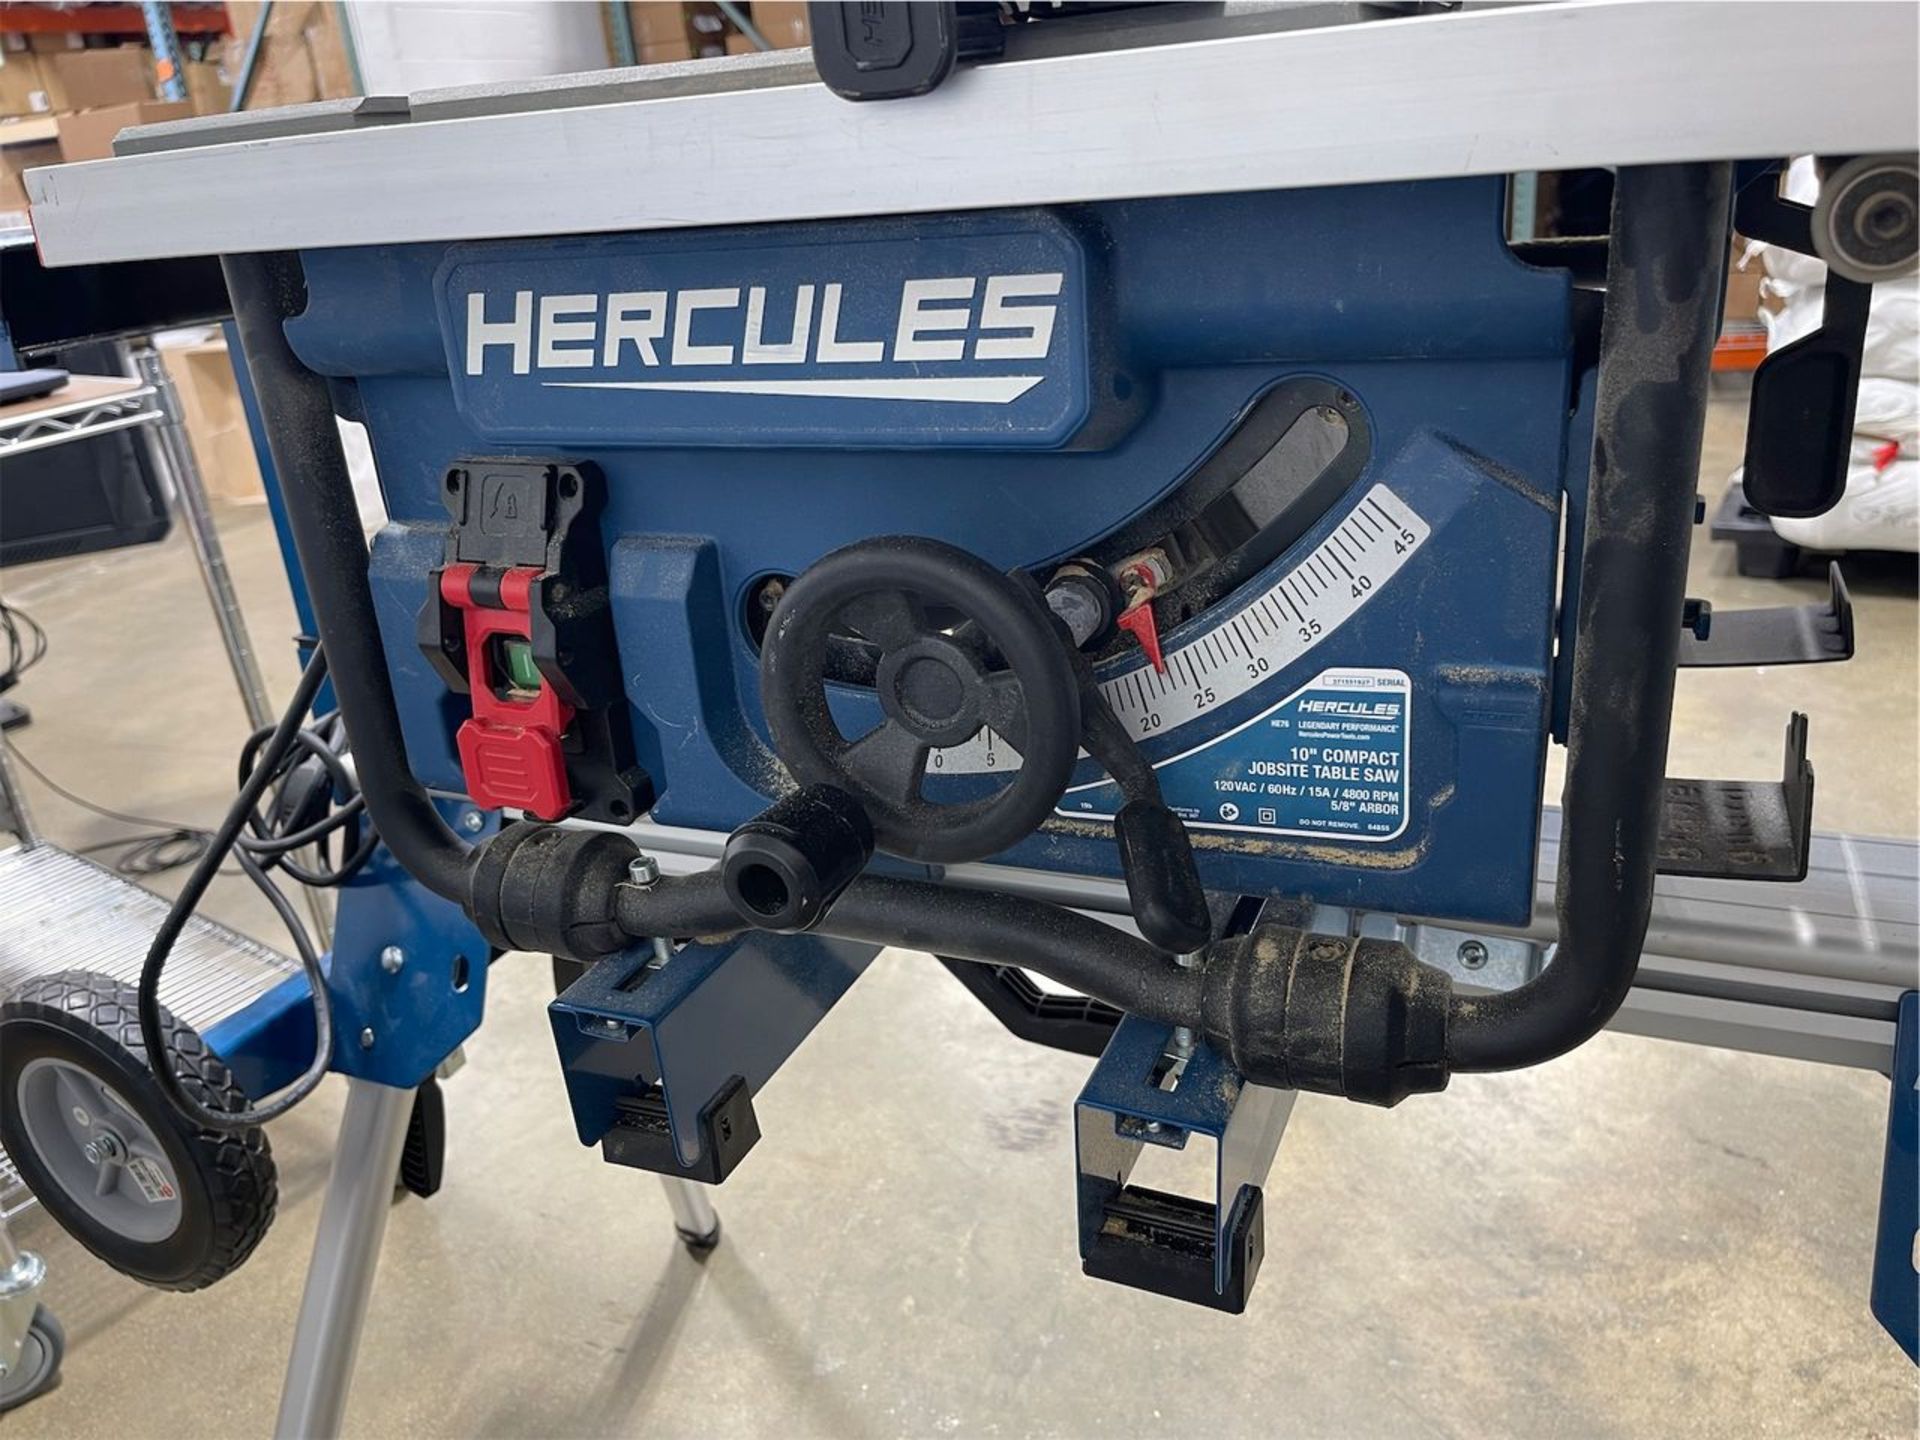 Hercules 10 in. Compact Jobsite Table Saw, 5/8 in. Arbor, on Hercules Mobile Folding Stand - Image 4 of 7